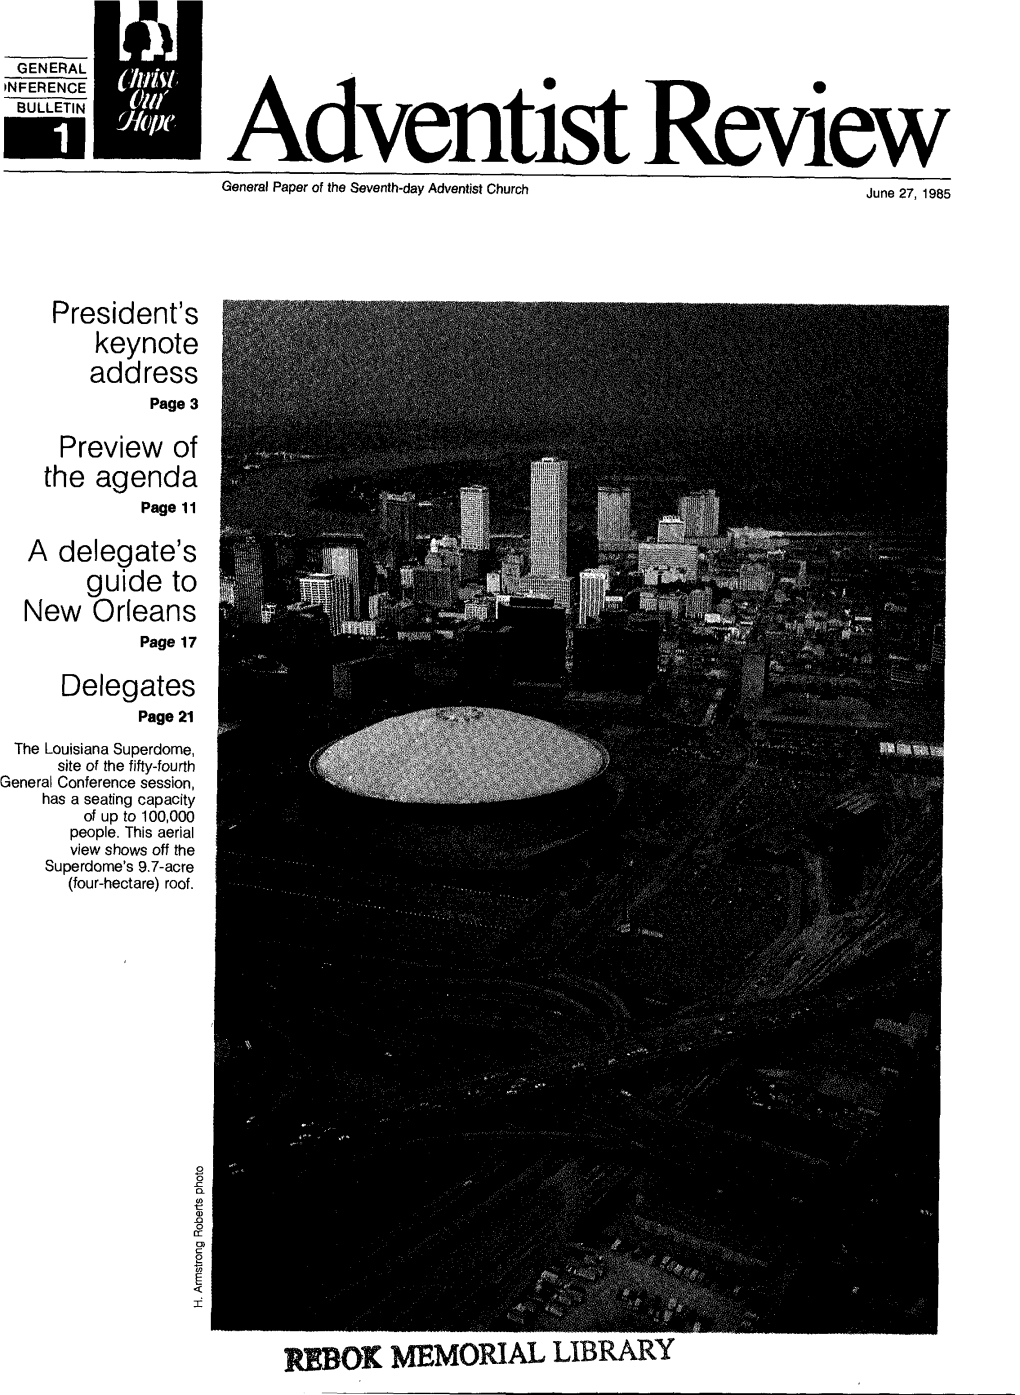 ADVENTIST REVIEW, JUNE 27, 1985 Hensive Report of Progress and Difficulties